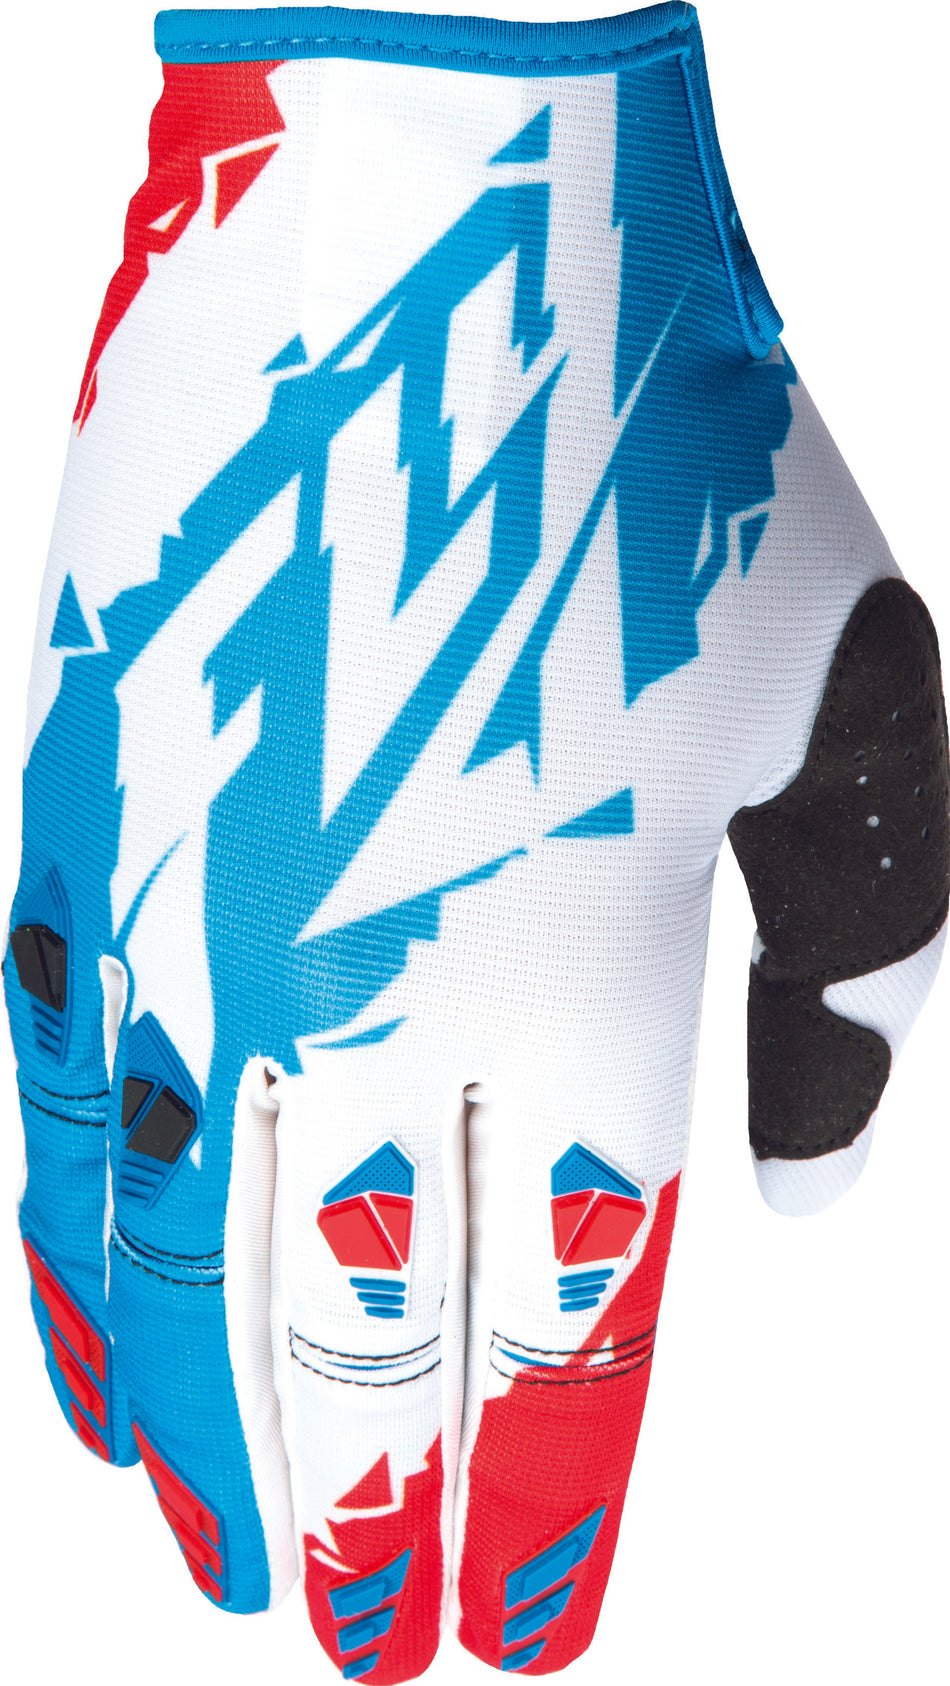 FLY RACING Kinetic Glove Red/White/Blue Sz 9 M 370-41109